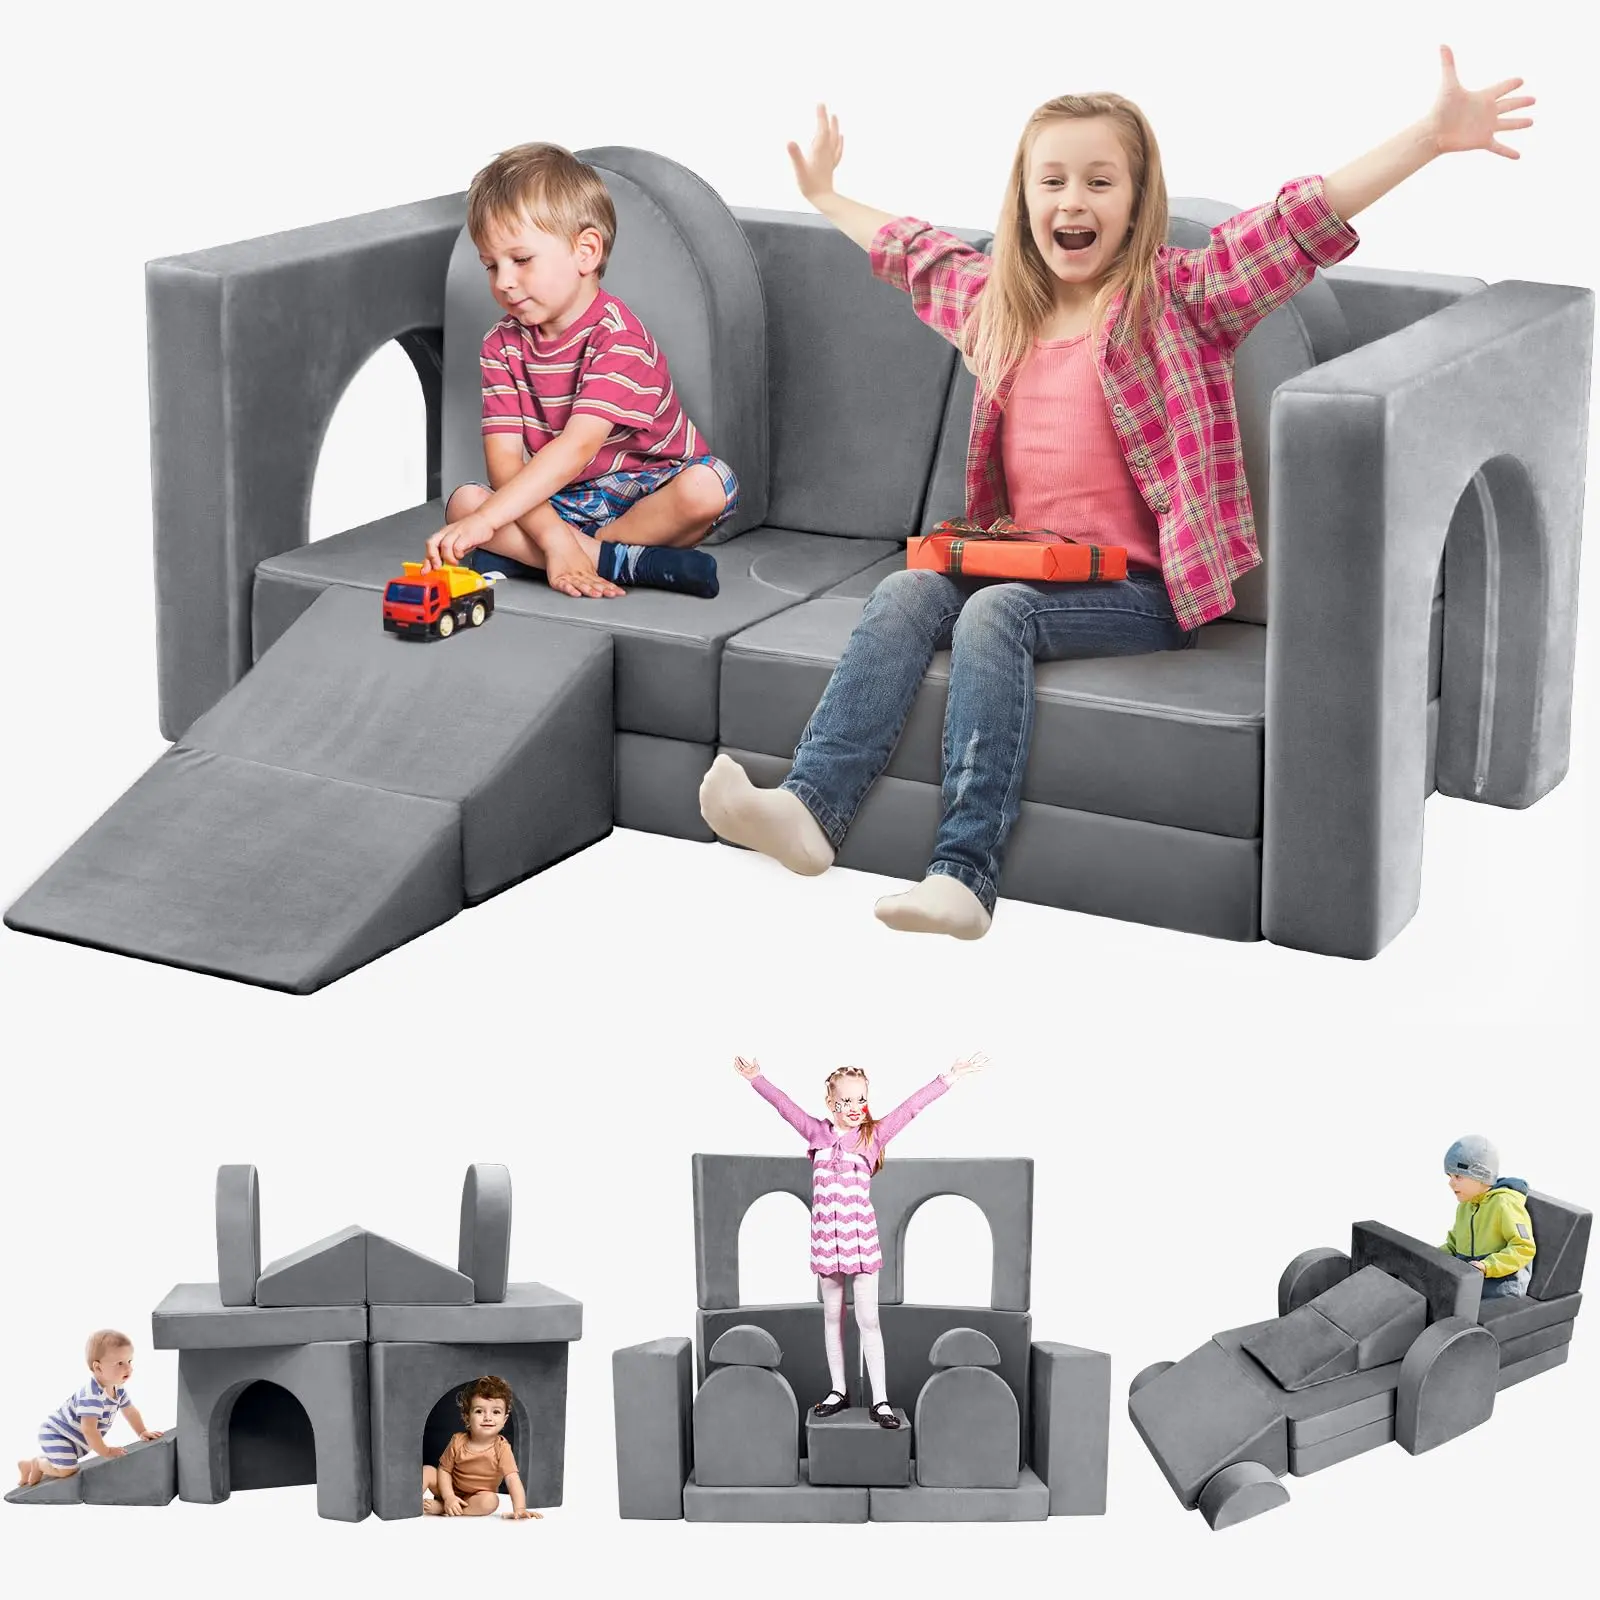 14pcs Modular Kids Play Couch Child Sectional Sofa Convertible Foam and Floor Cushion Nugget couch